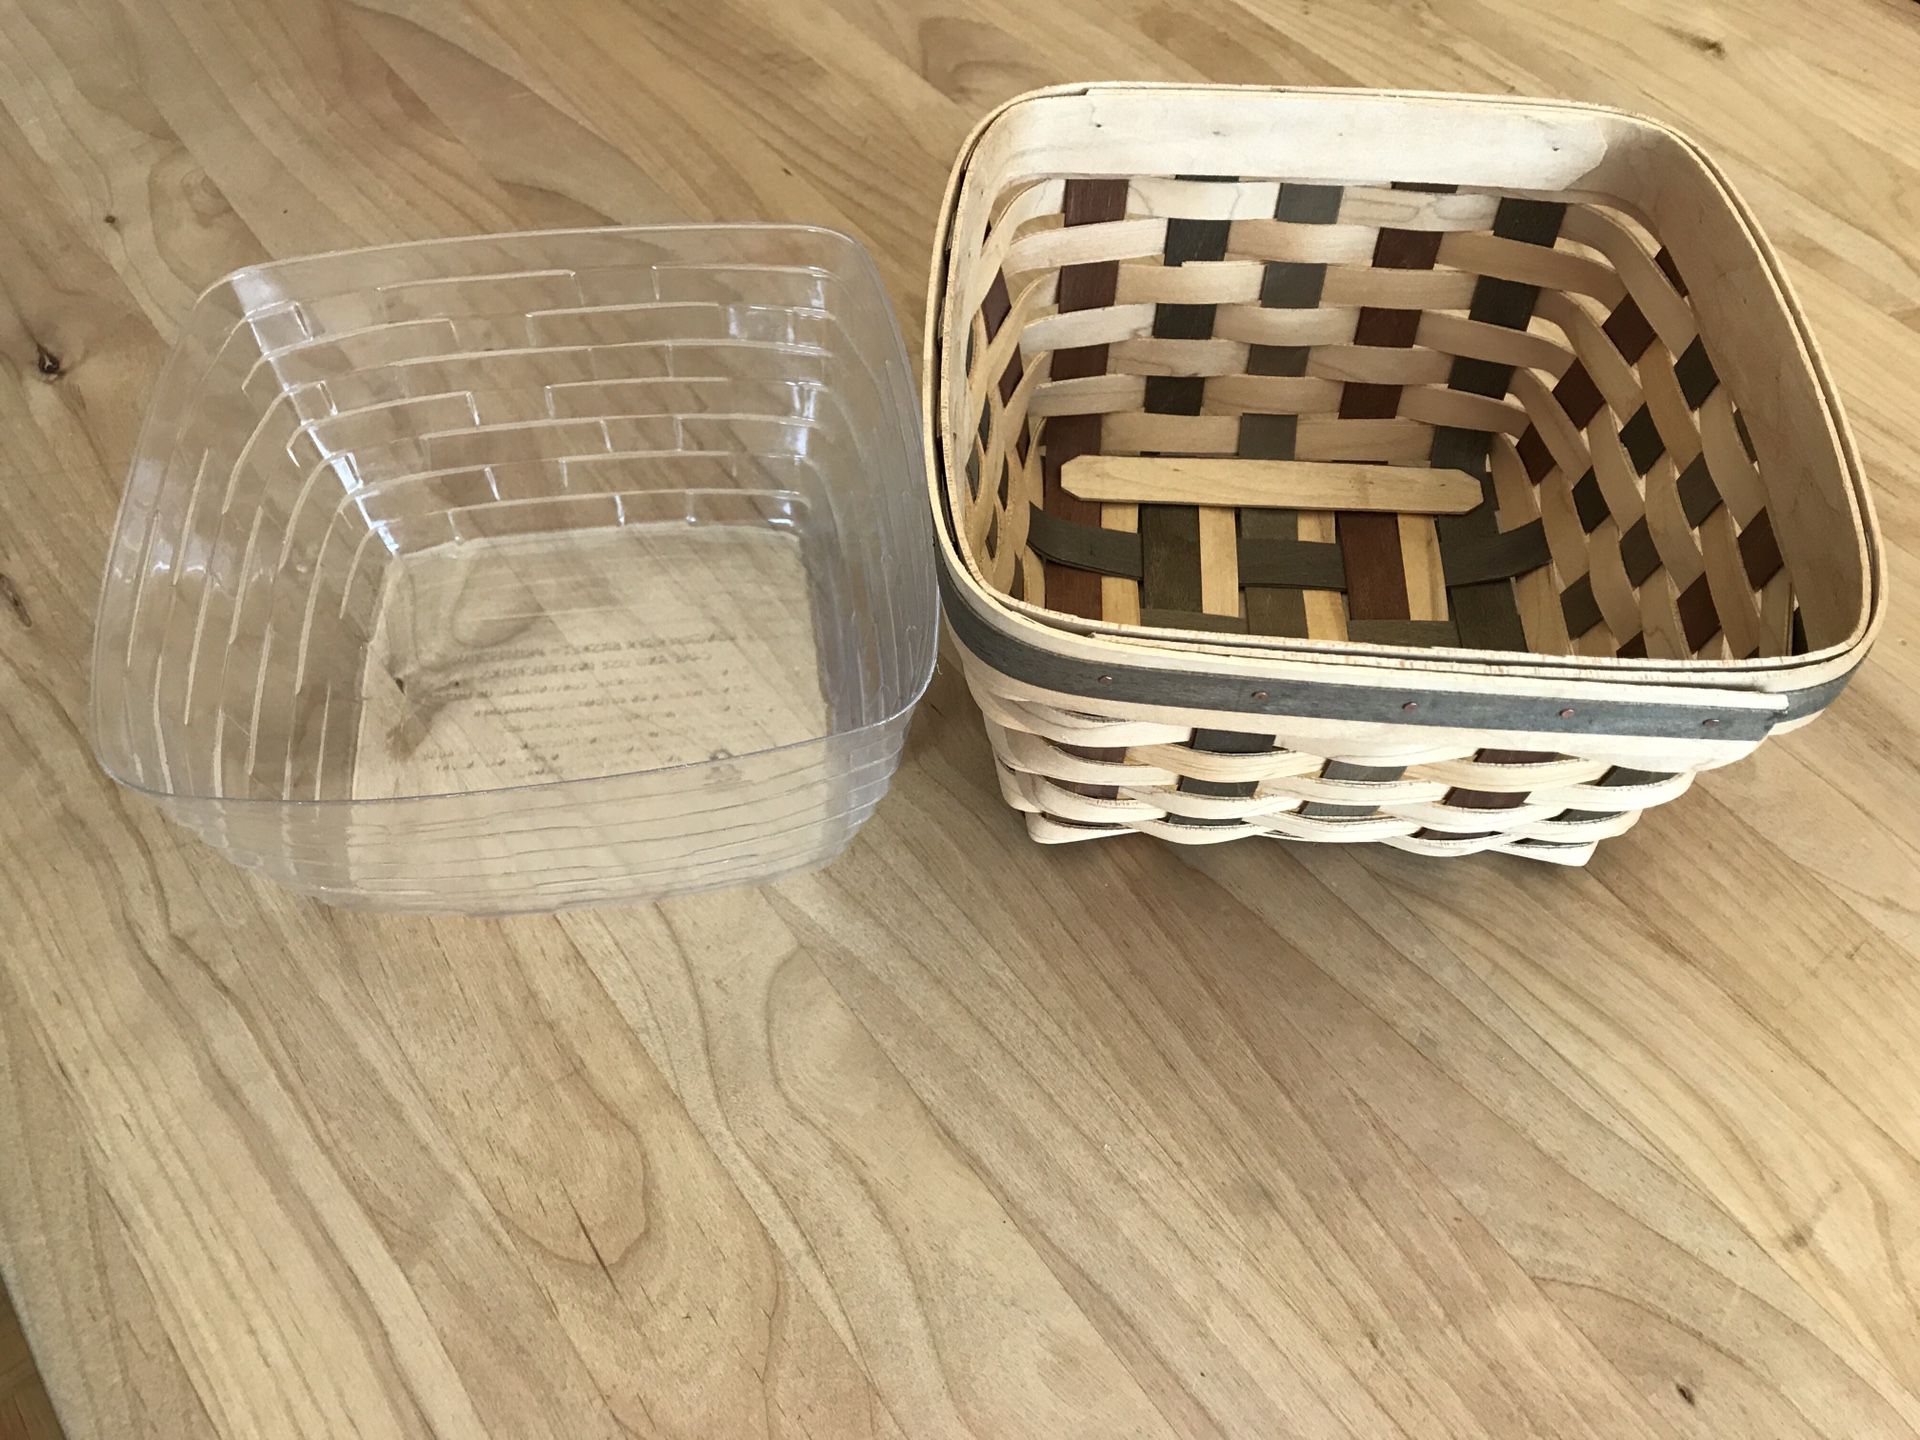 Medium Size 2006 Longaberger Basket (7.5 x 7.5) With Plastic Liner American Craft Traditions